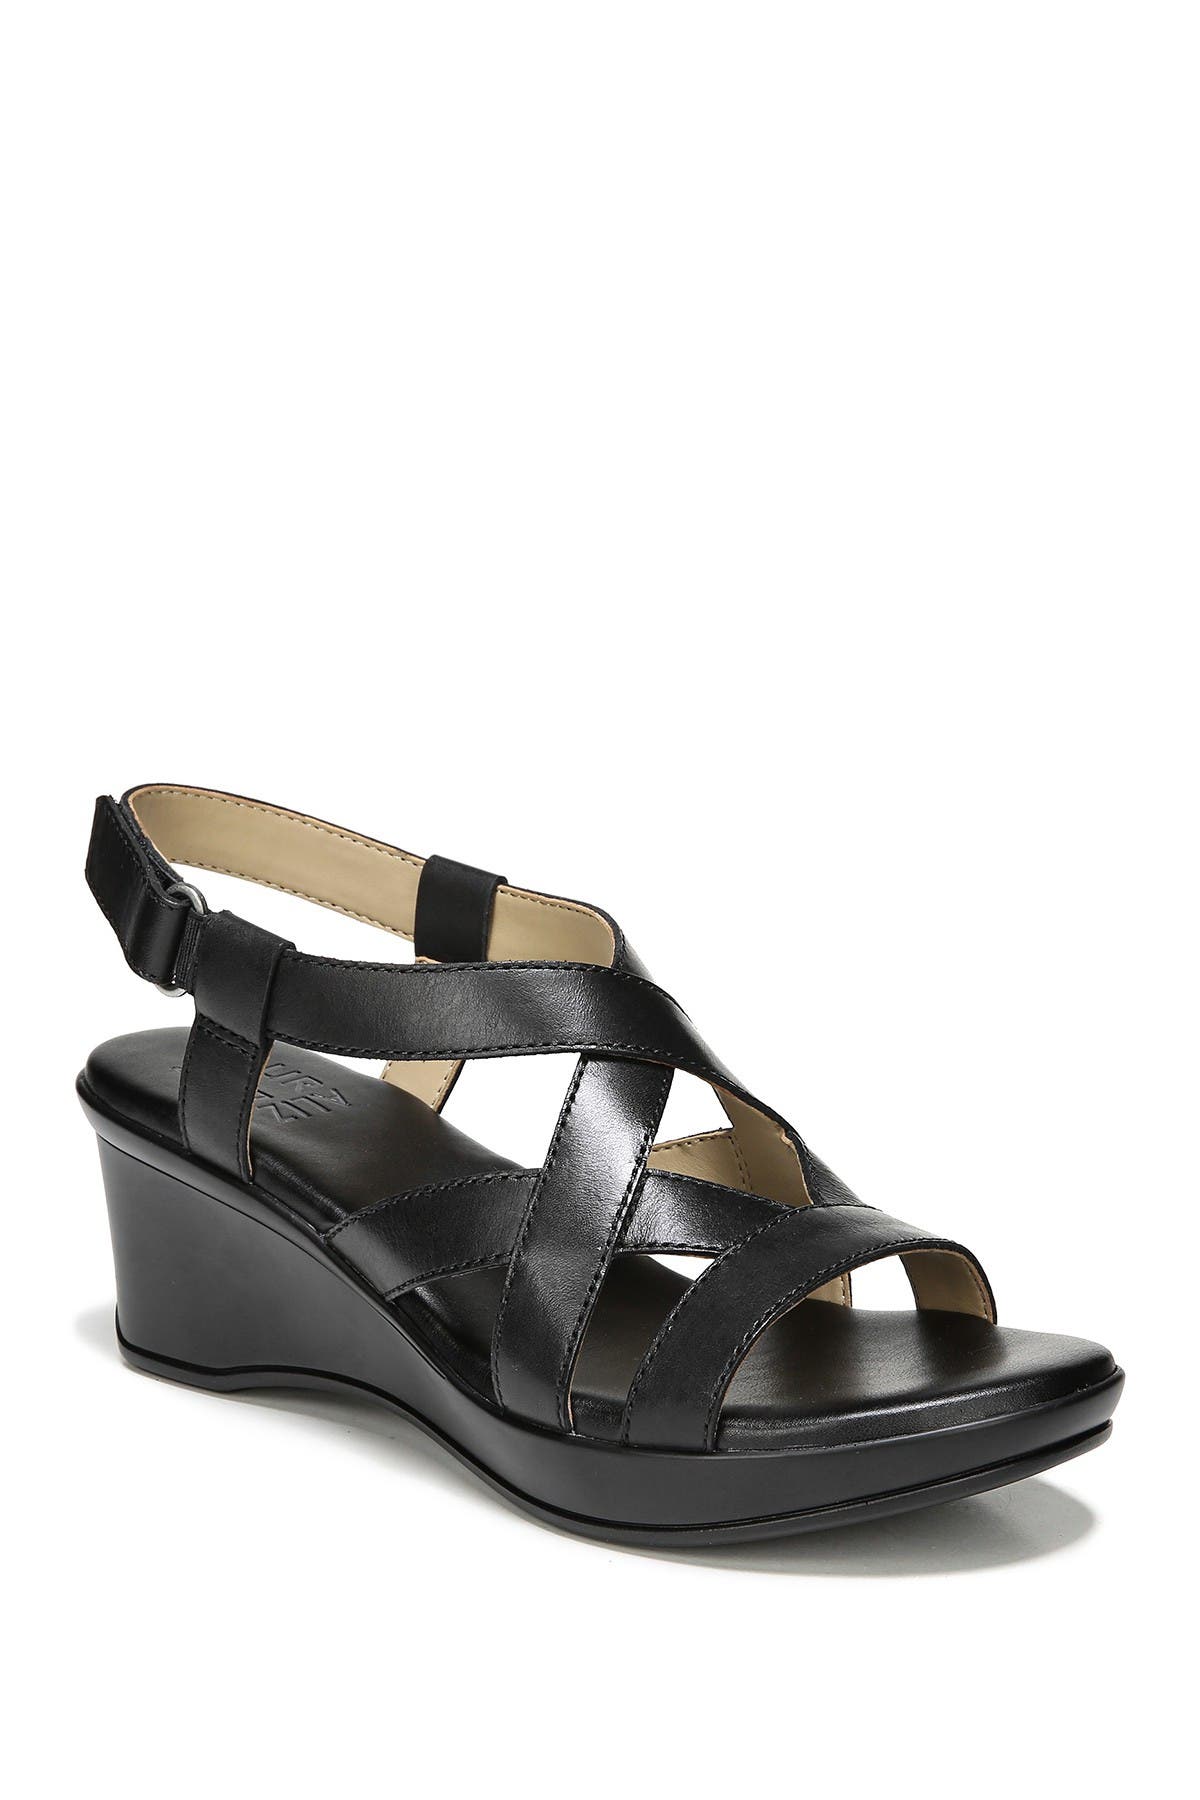 tommy hilfiger chunky sandals